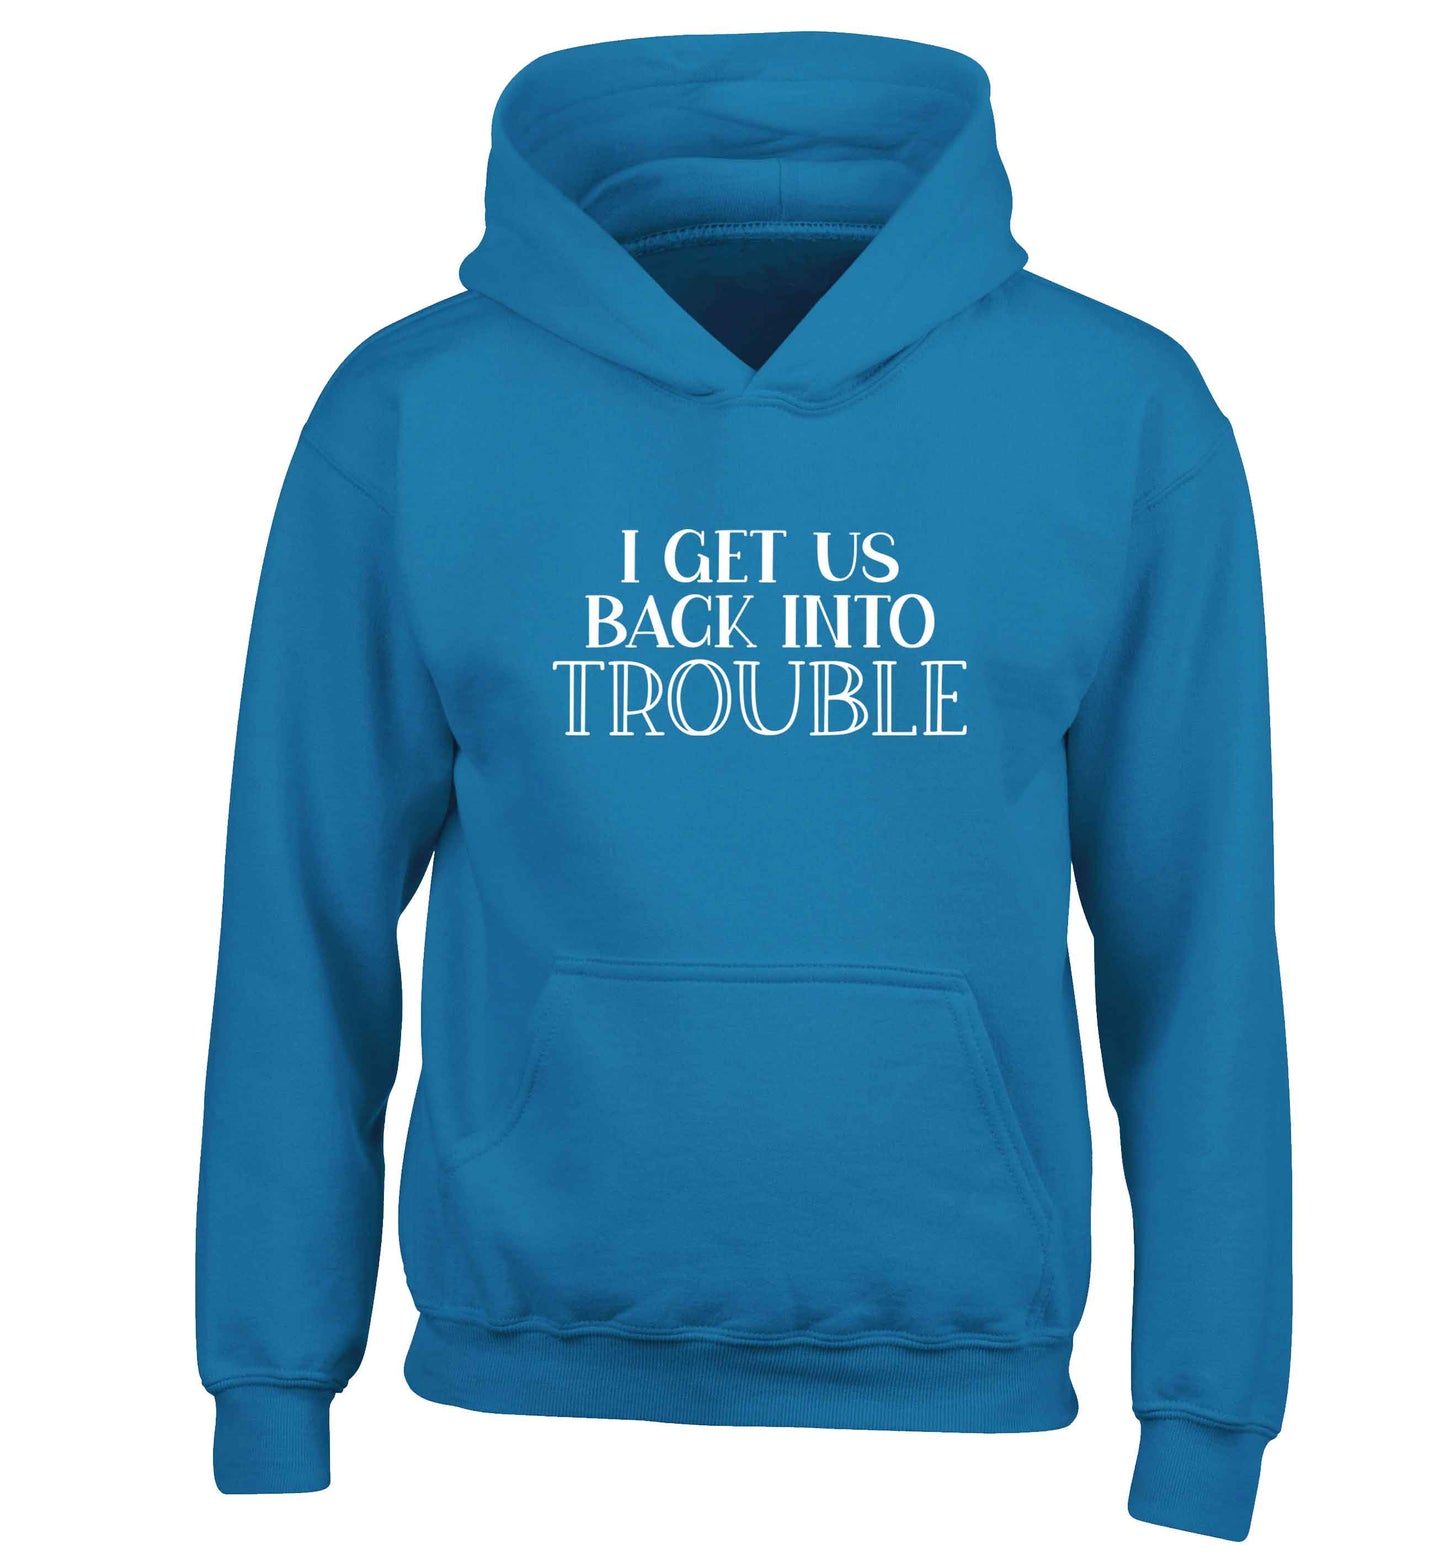 I get us back into trouble children's blue hoodie 12-13 Years